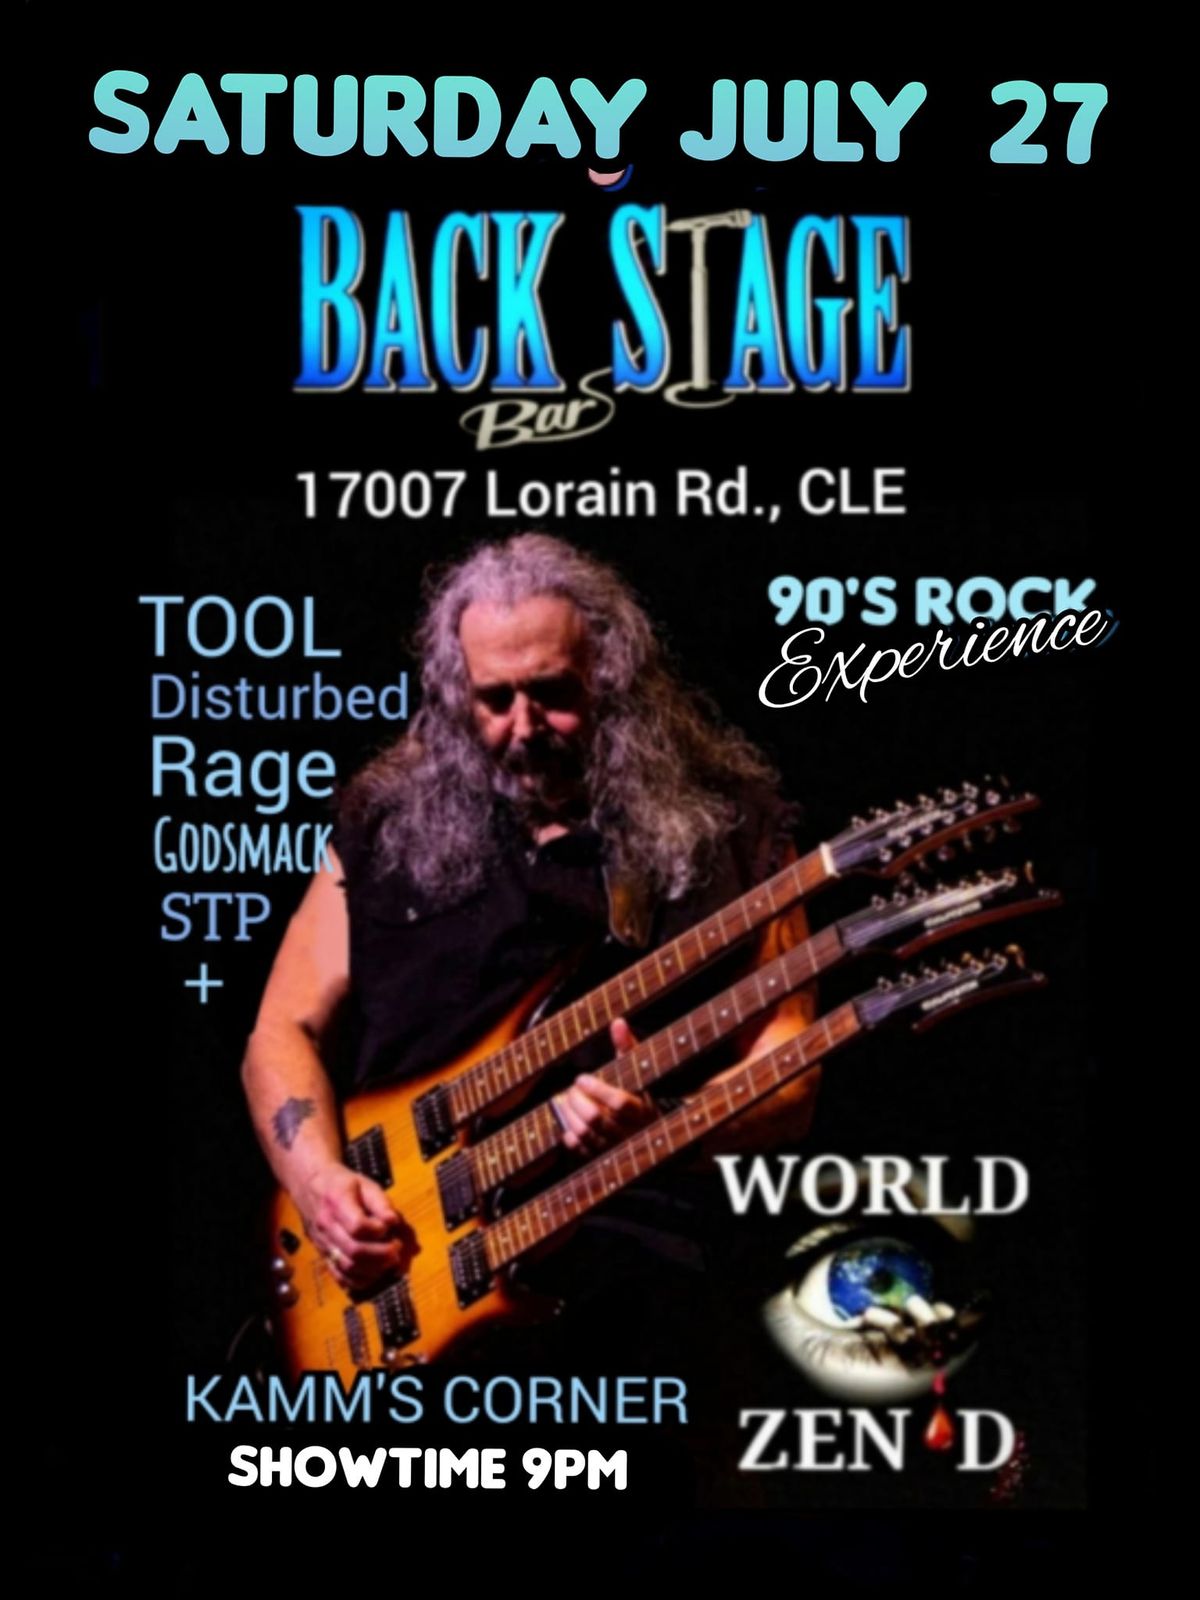 Kamm's Corner's bringing WORLD ZEN'D BAND back for another High Energy 90's Rock Experience 